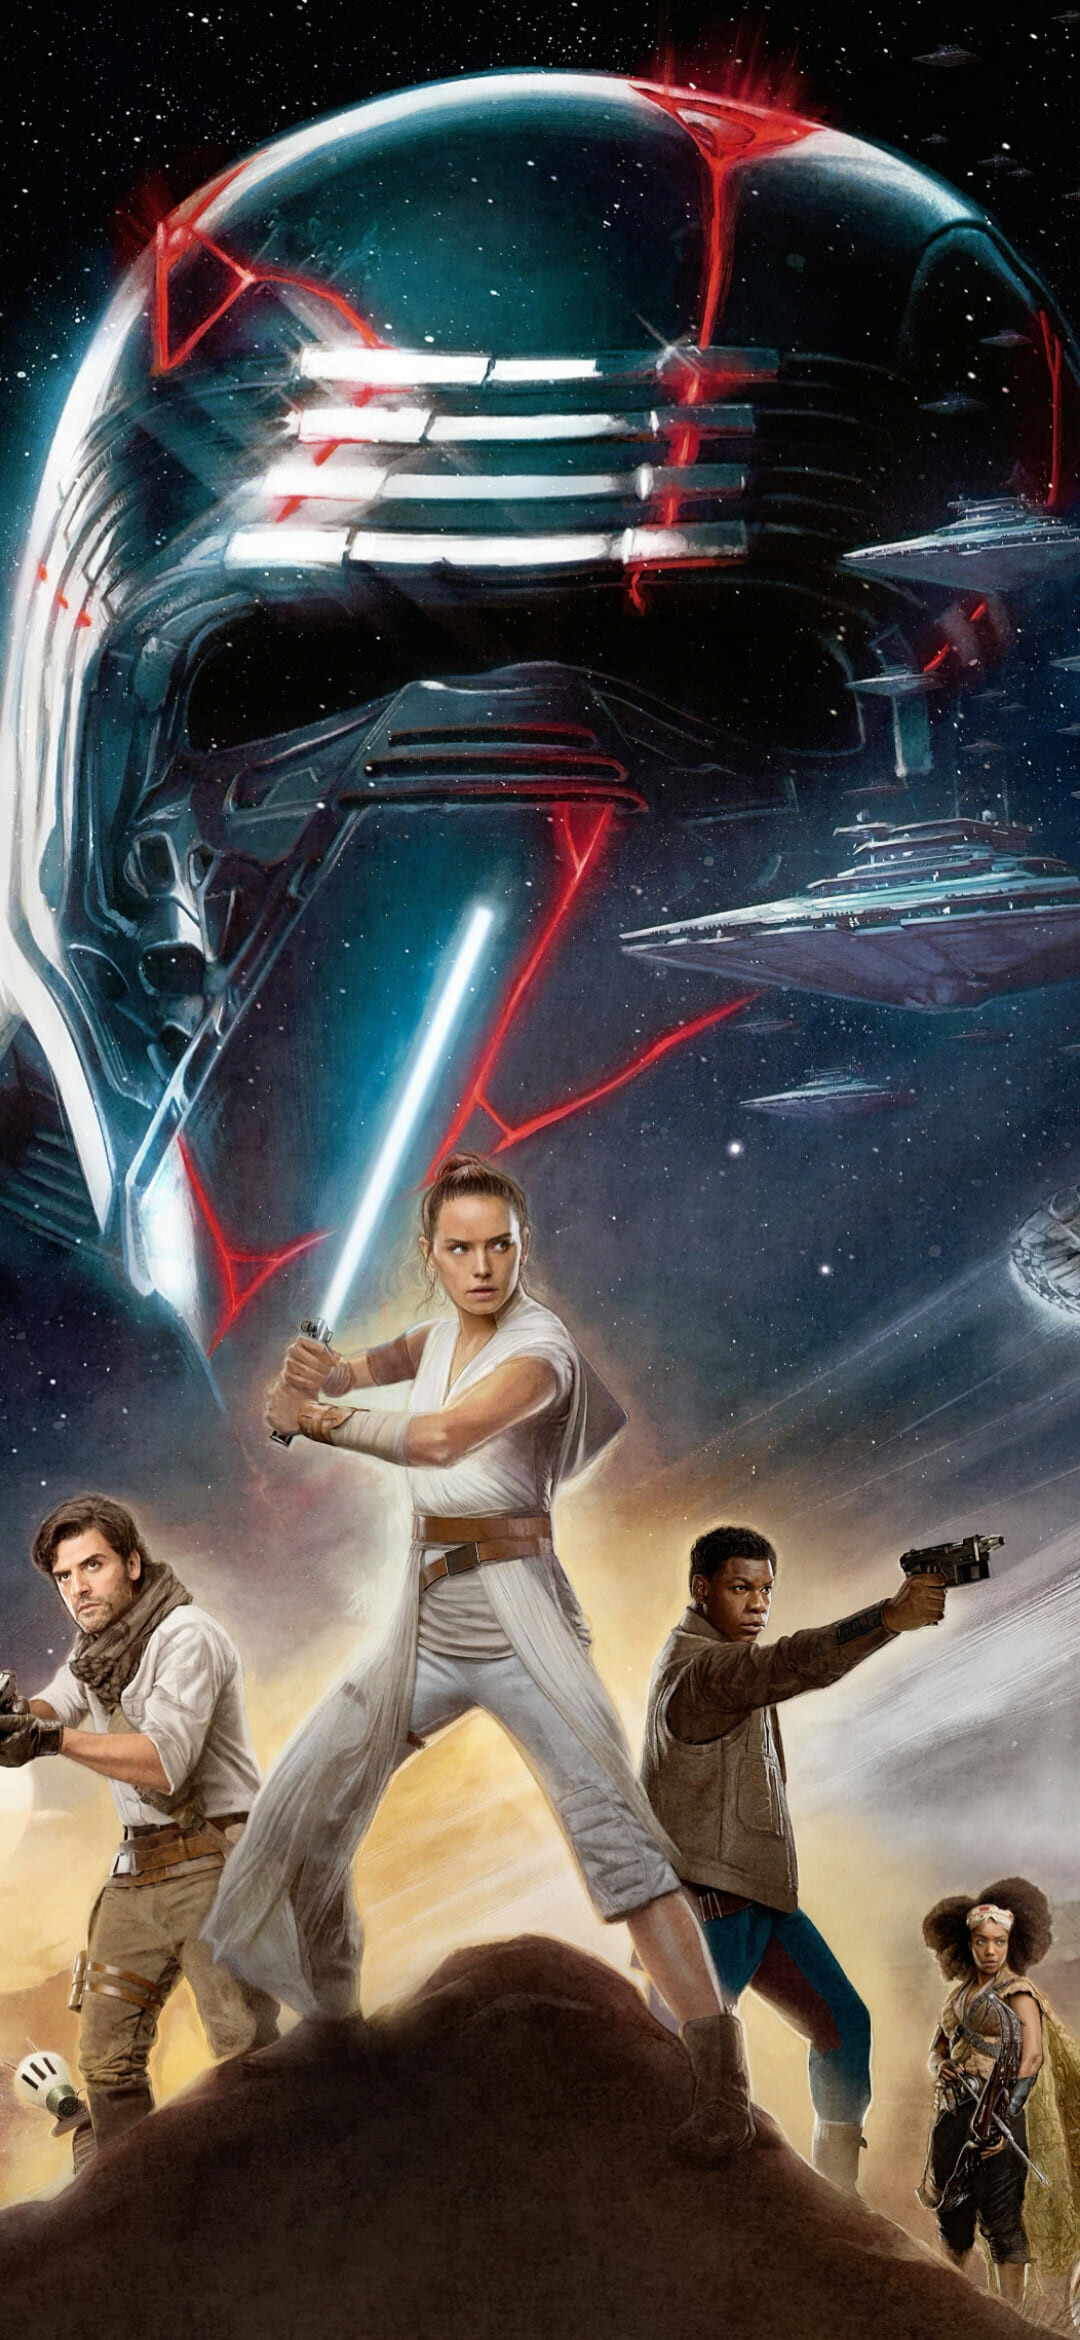 Star Wars: The Rise of Skywalker, Won five awards at the 46th Saturn Awards, including Best Science Fiction Film. 1080x2340 HD Background.